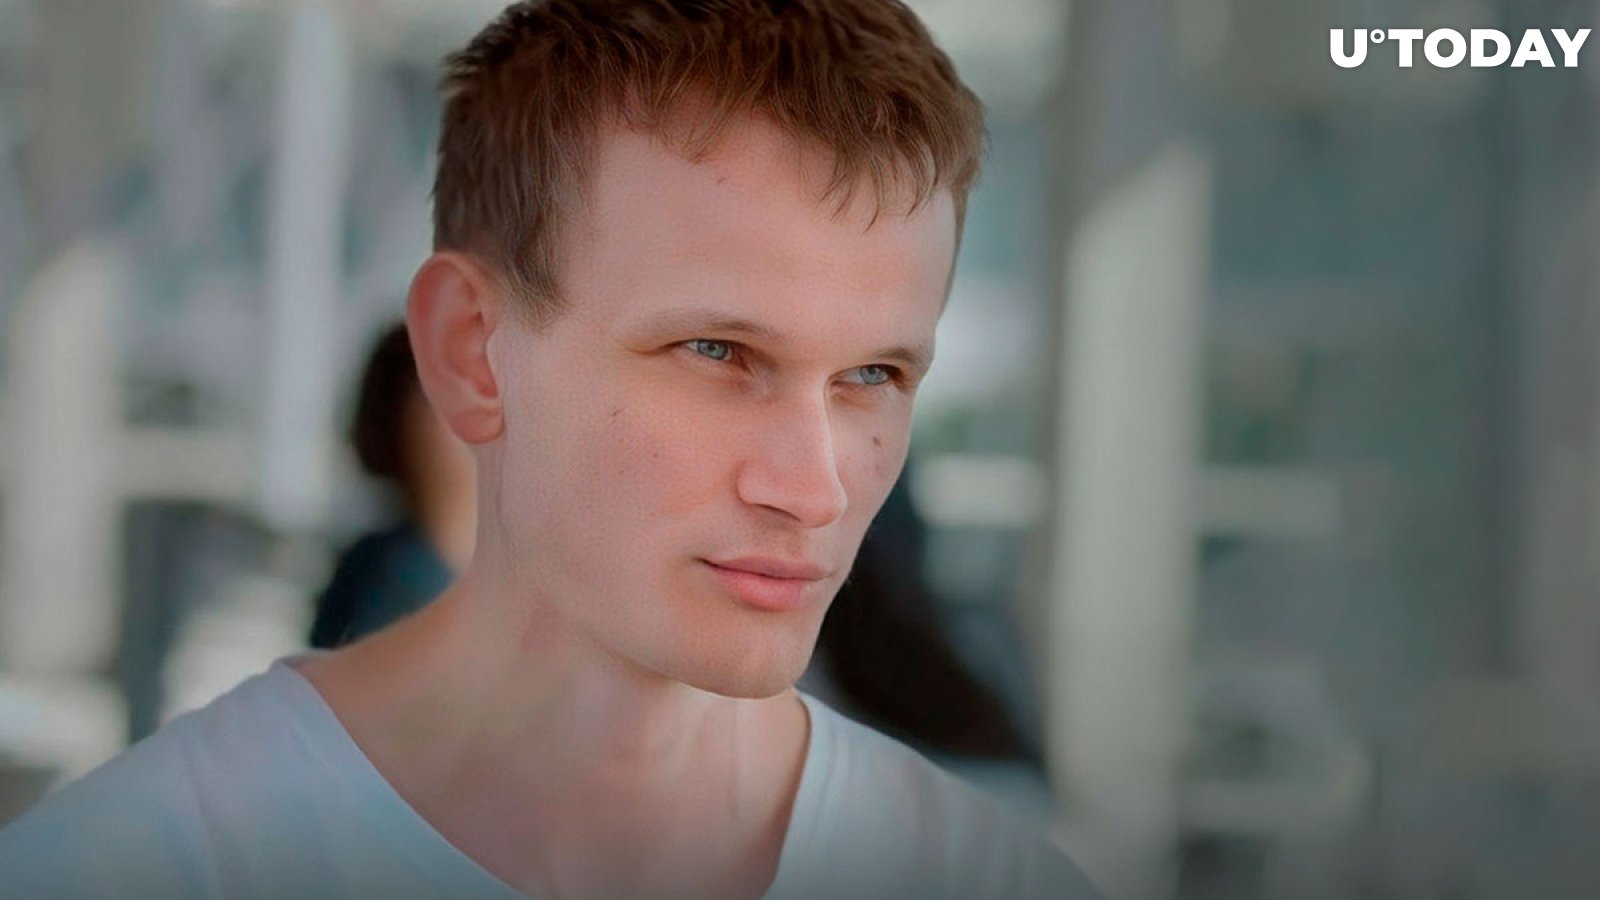 Ethereum Co-Founder Vitalik Buterin Moves Massive Amount of ETH to Coinbase